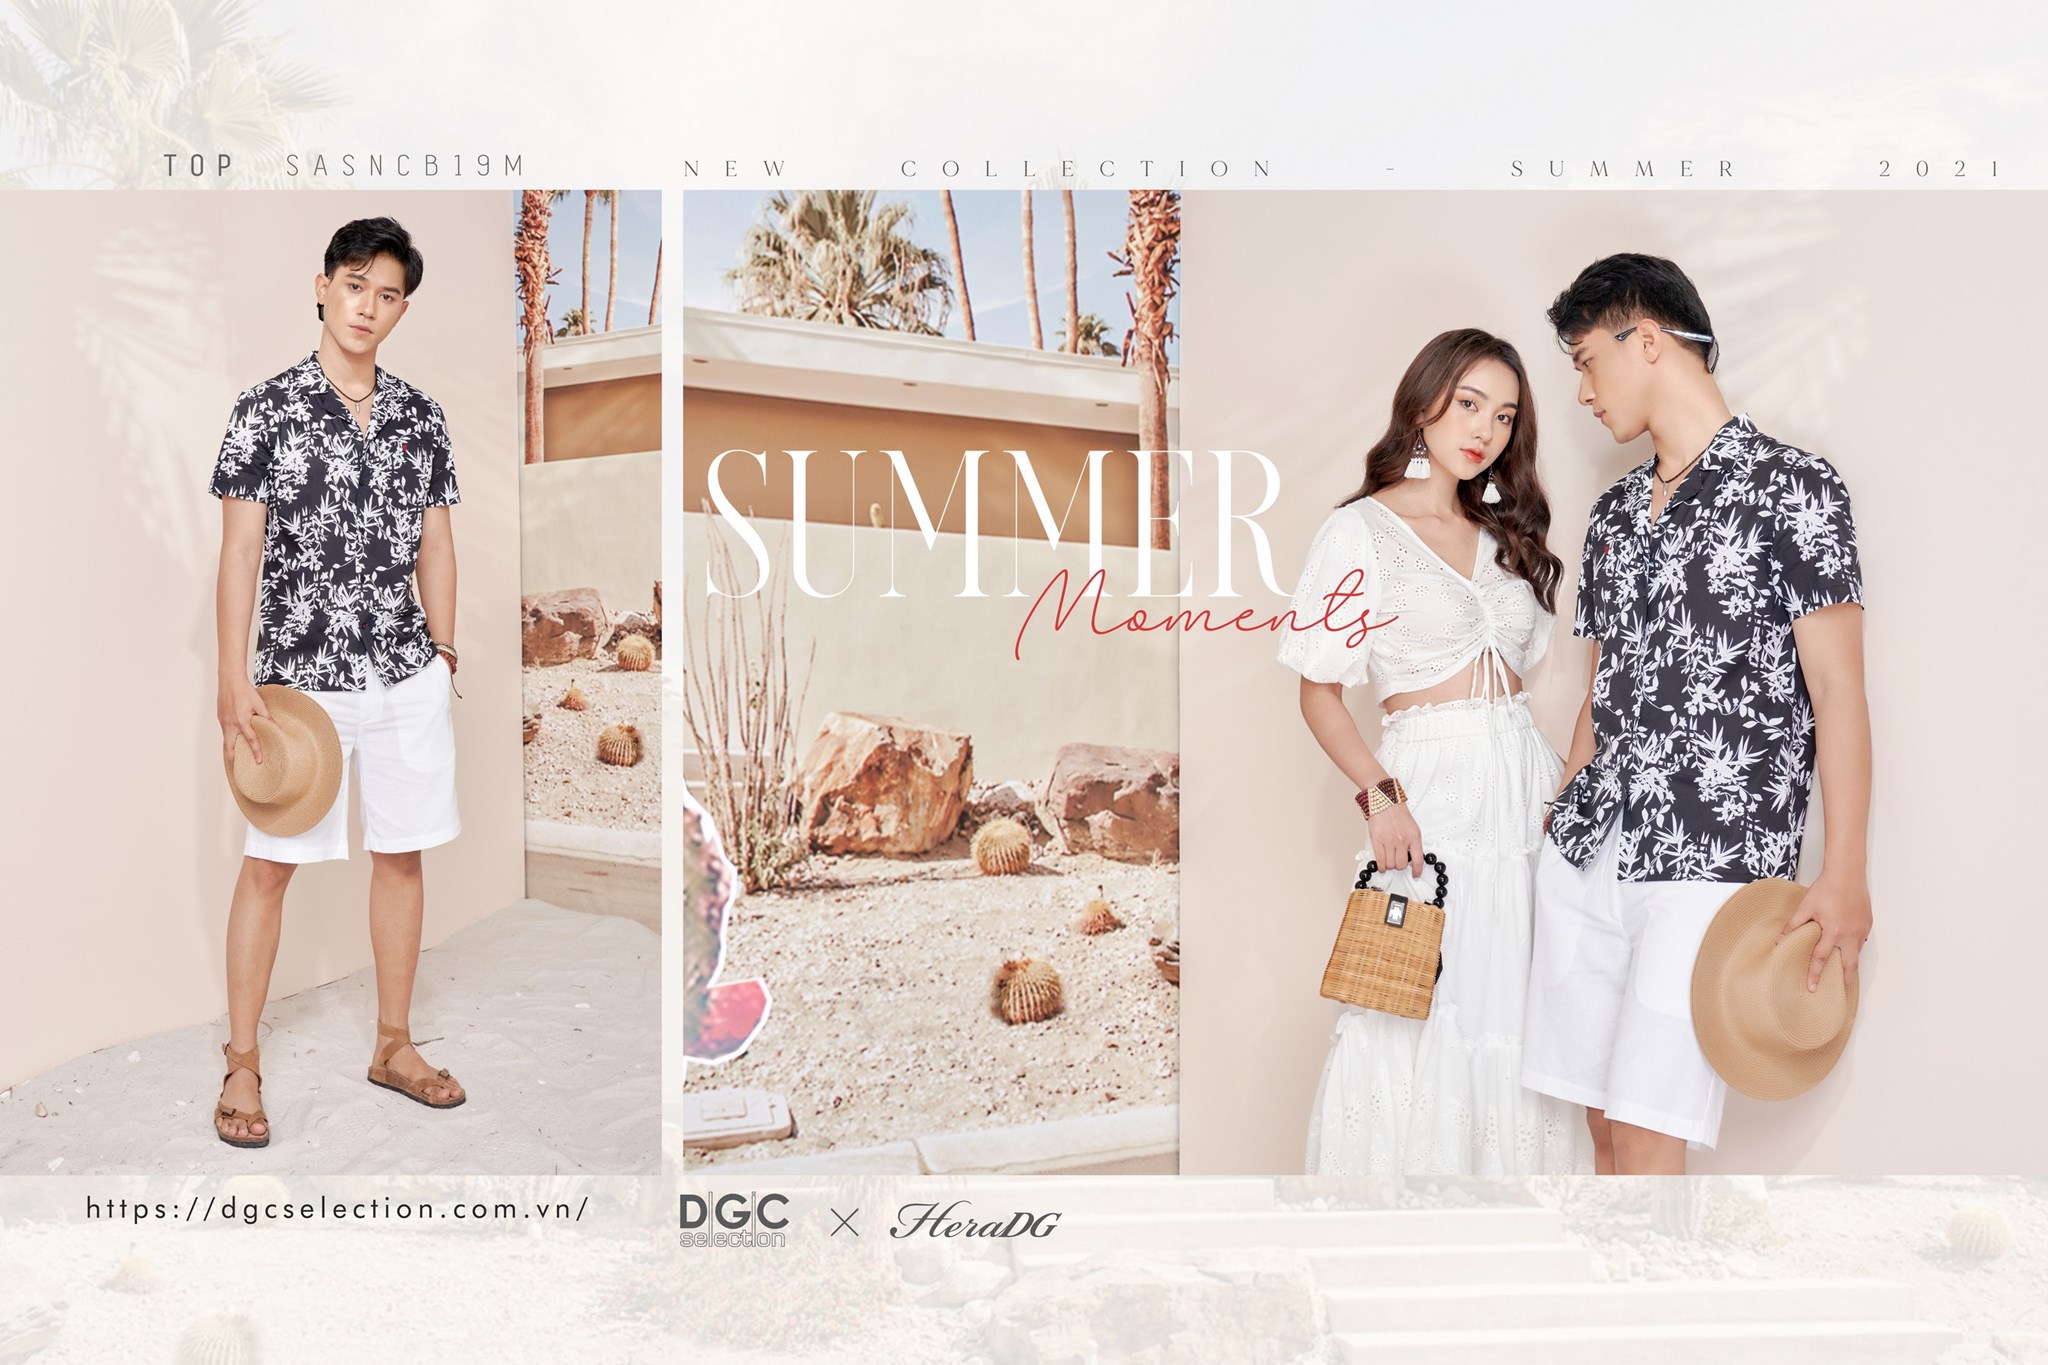 Summer Moments | New Collection 2021